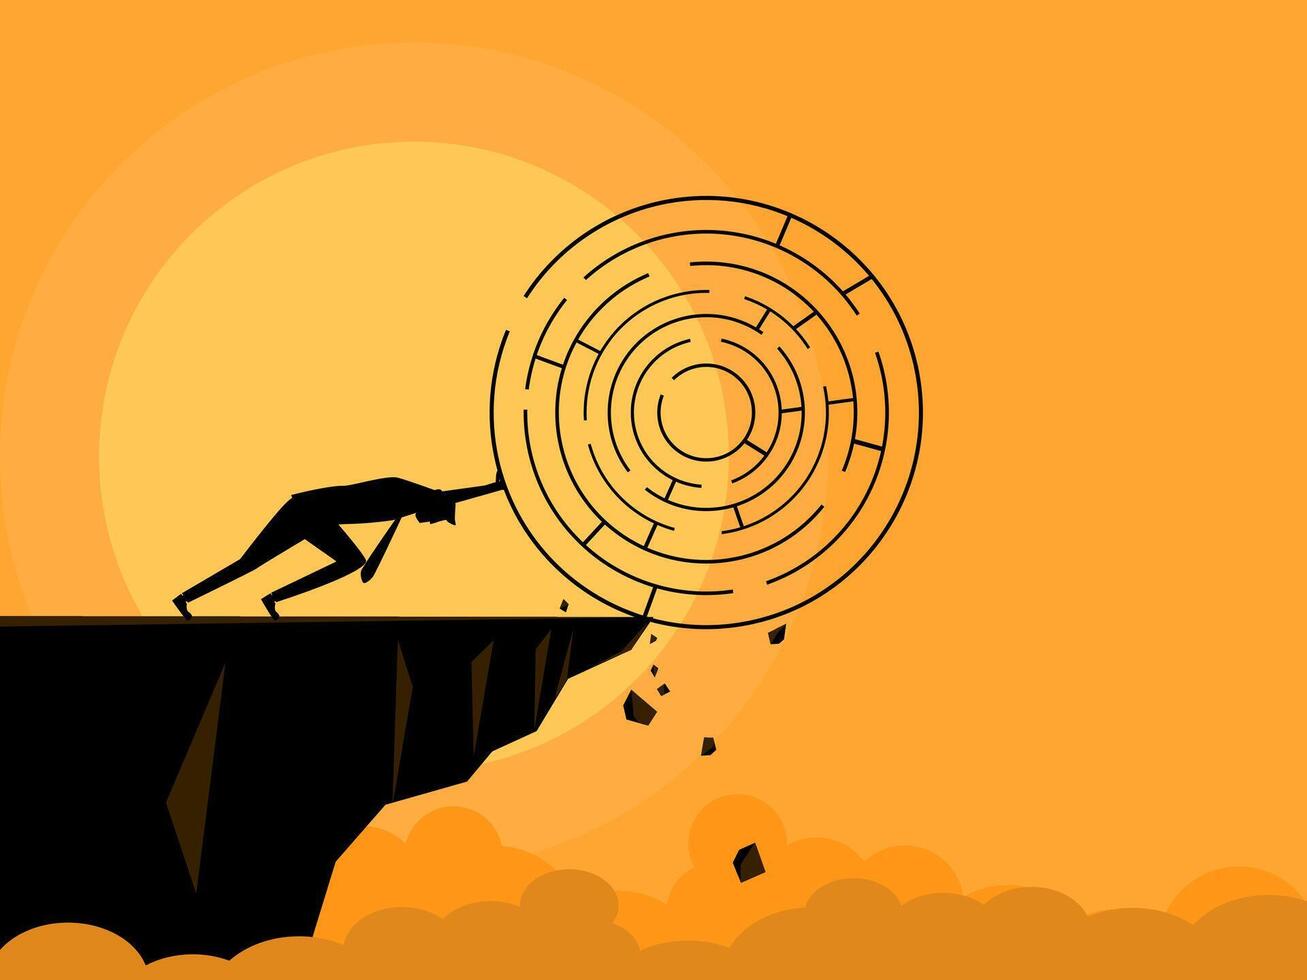 People try to push problems or mazes off cliffs. business concept vector